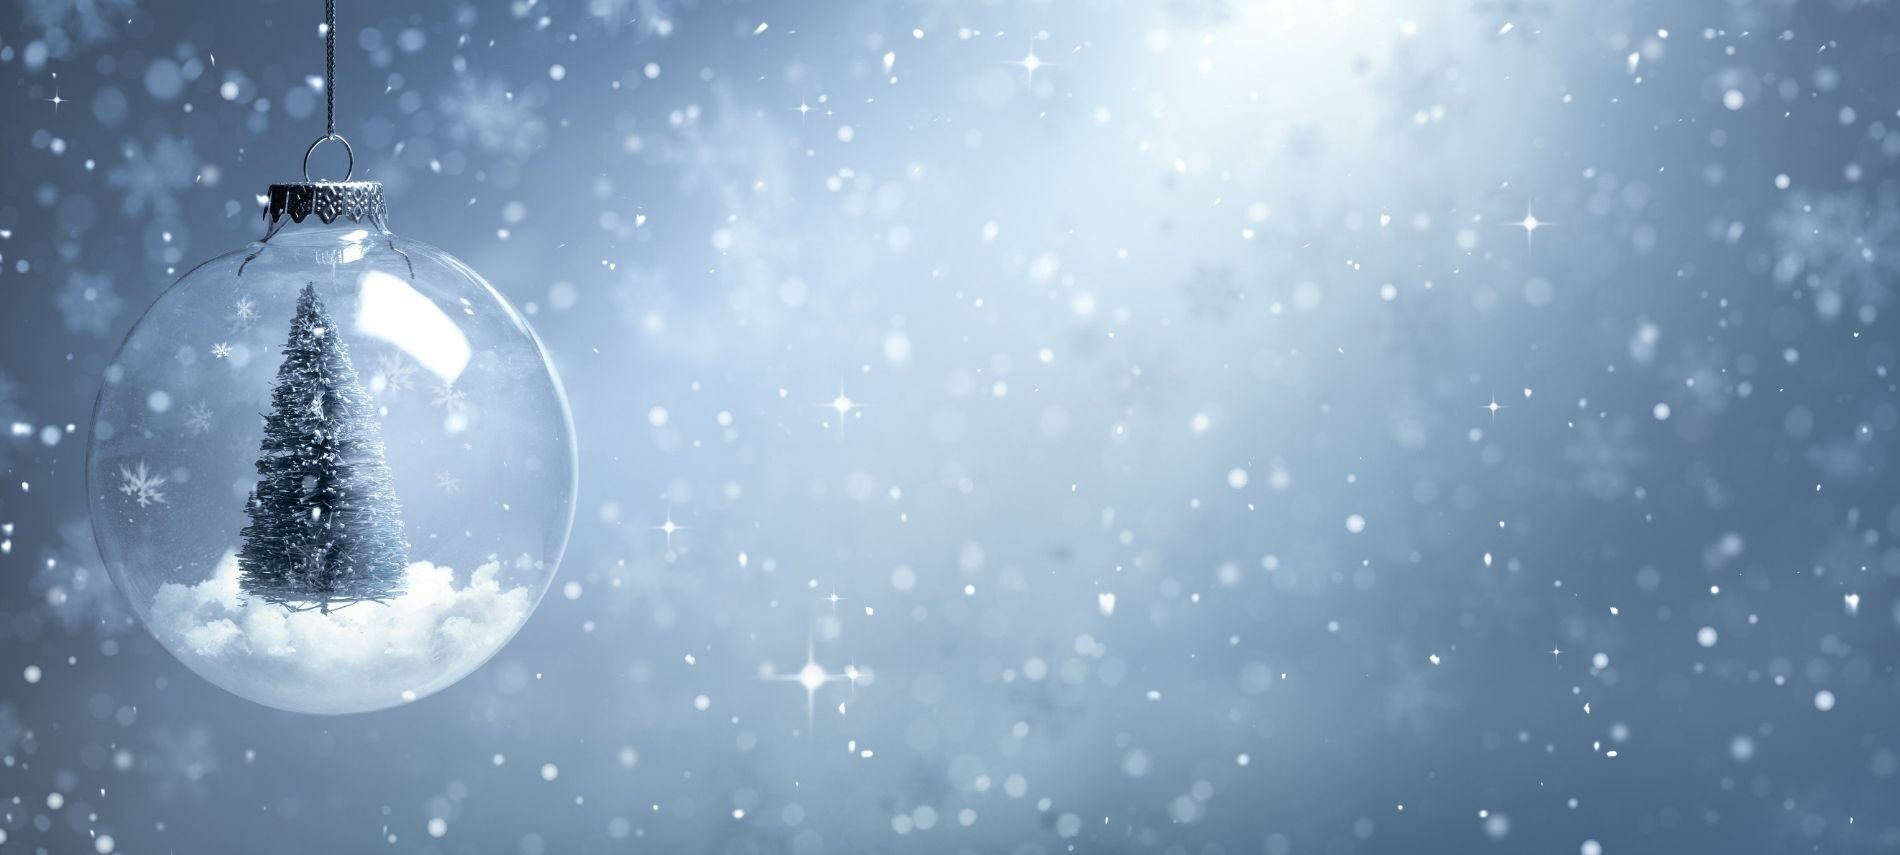 Single clear bulb with a Christmas tree inside surrounded by sparkling snow flurries against a gray background